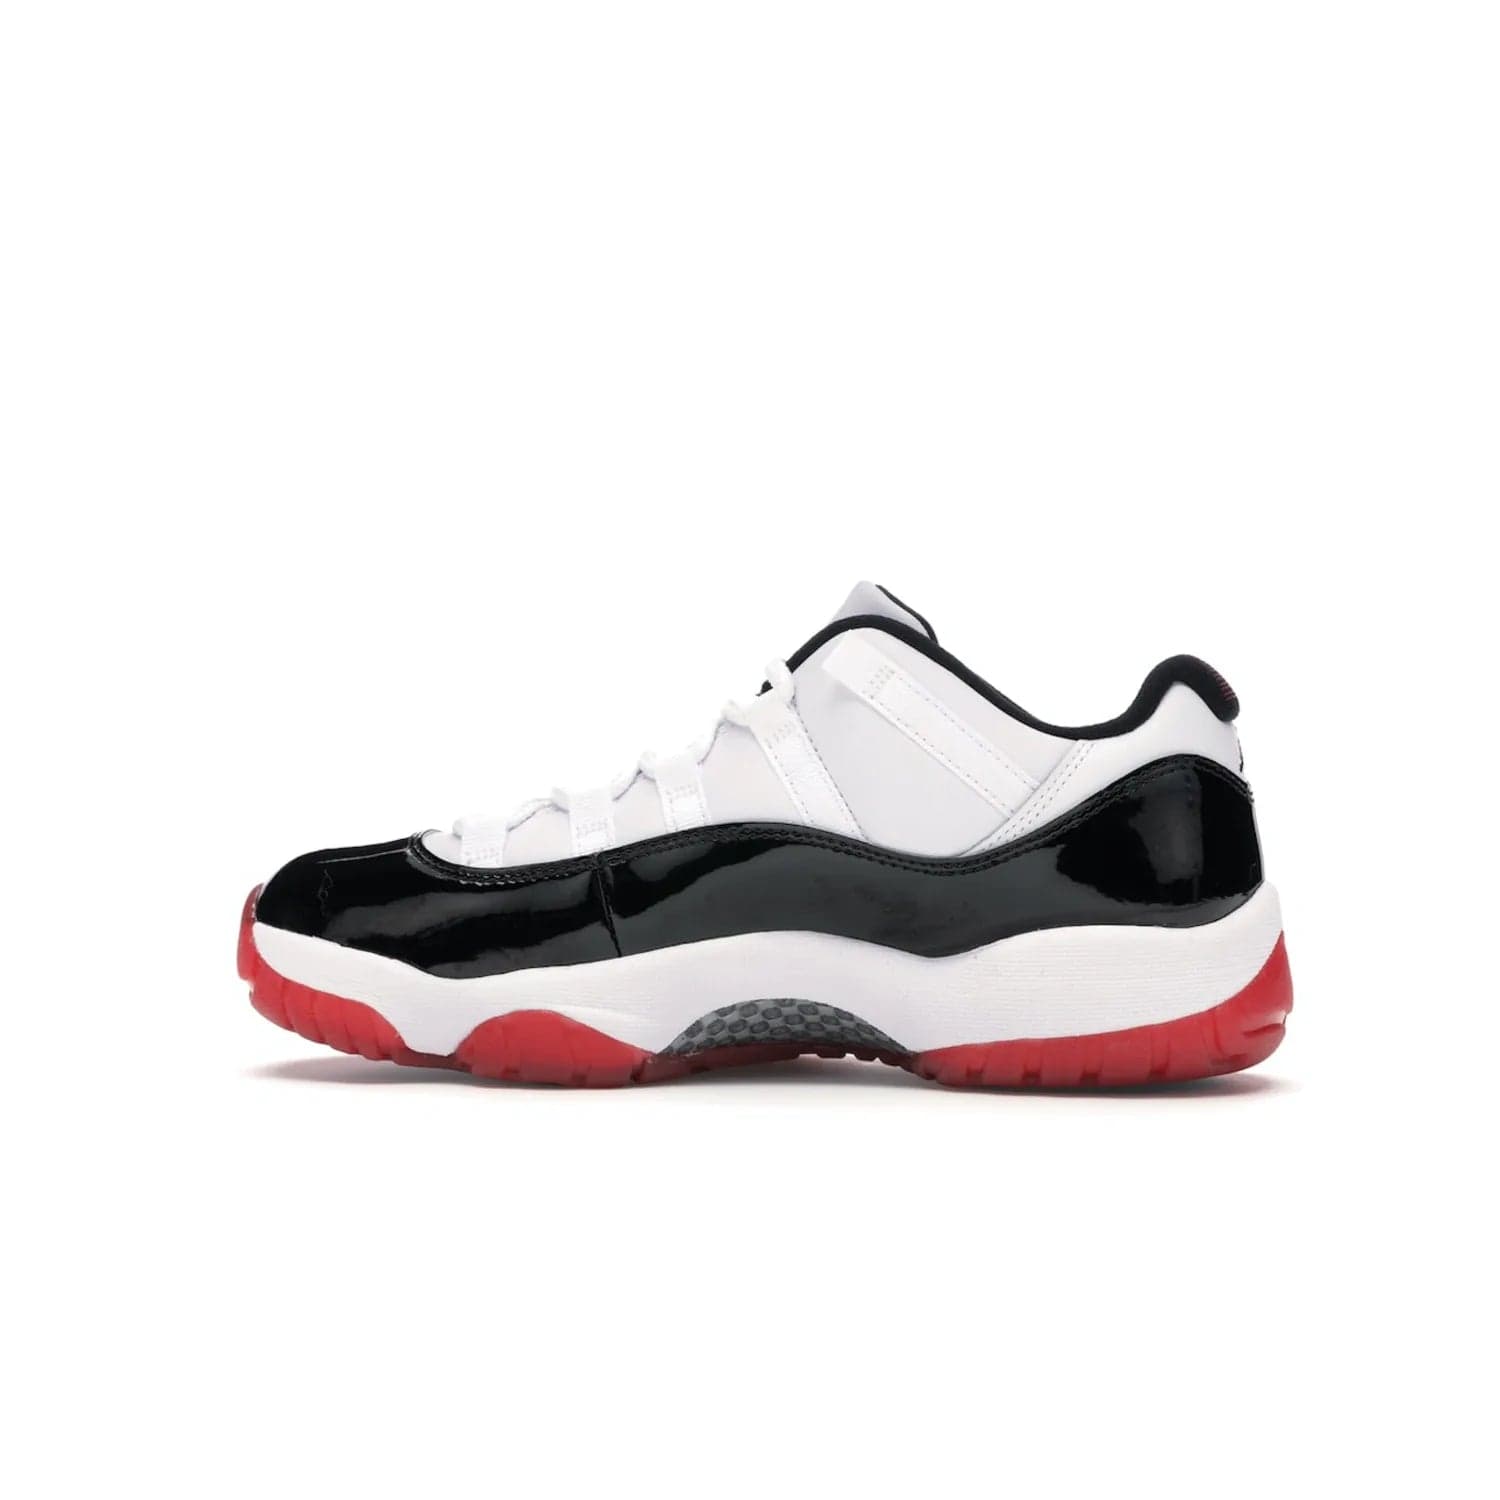 Jordan 11 Retro Low Concord Bred - Image 20 - Only at www.BallersClubKickz.com - Grab the classic Jordan 11 look with the Jordan 11 Retro Low Concord Bred. With white and black elements and the iconic red outsole of the Jordan 11 Bred, you won't miss a beat. Released in June 2020, the perfect complement to any outfit.